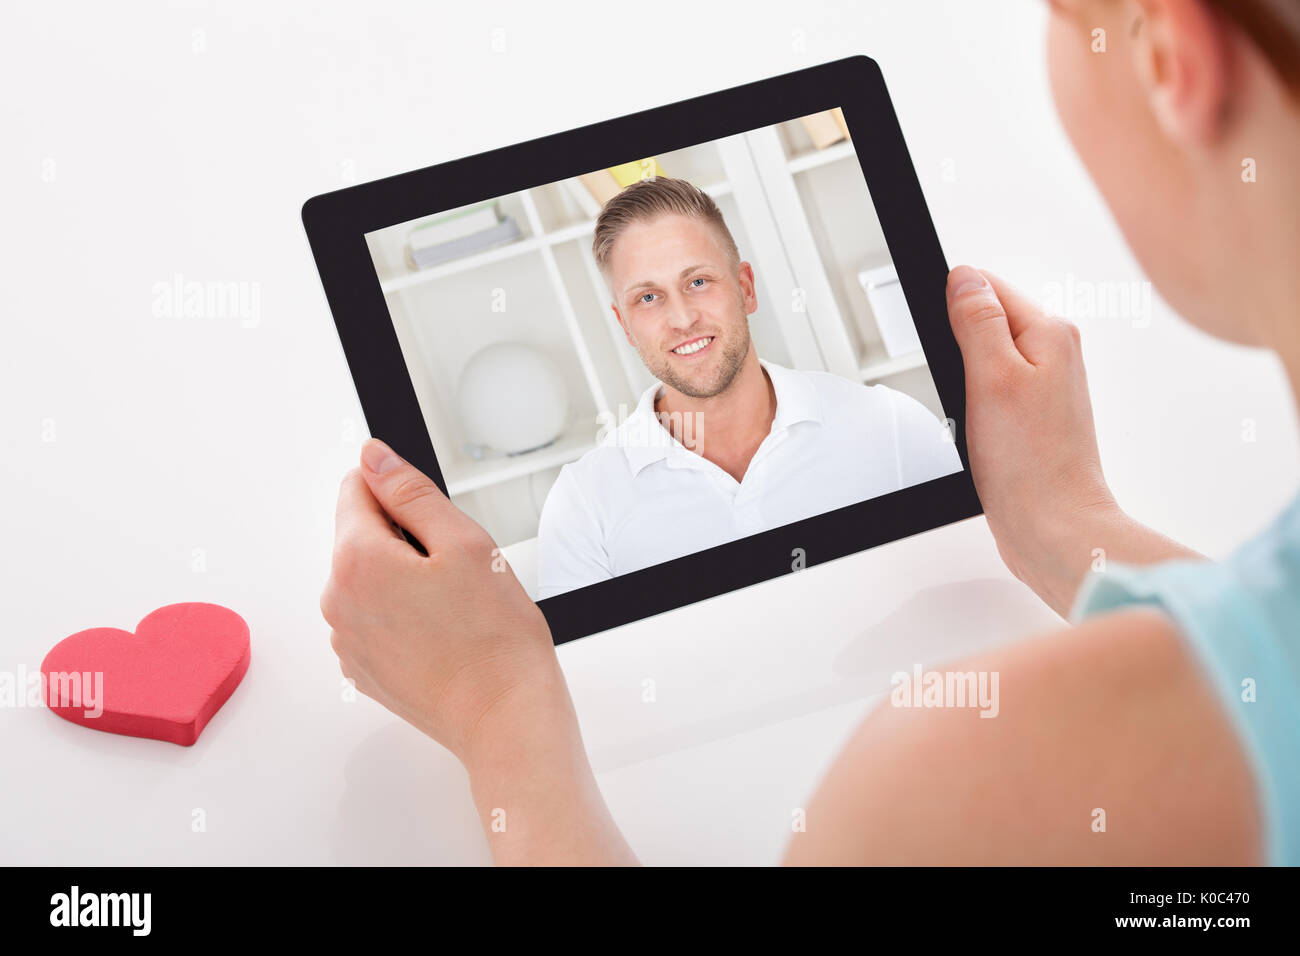 Cropped image of young woman having video chat with boyfriend on digital tablet Stock Photo